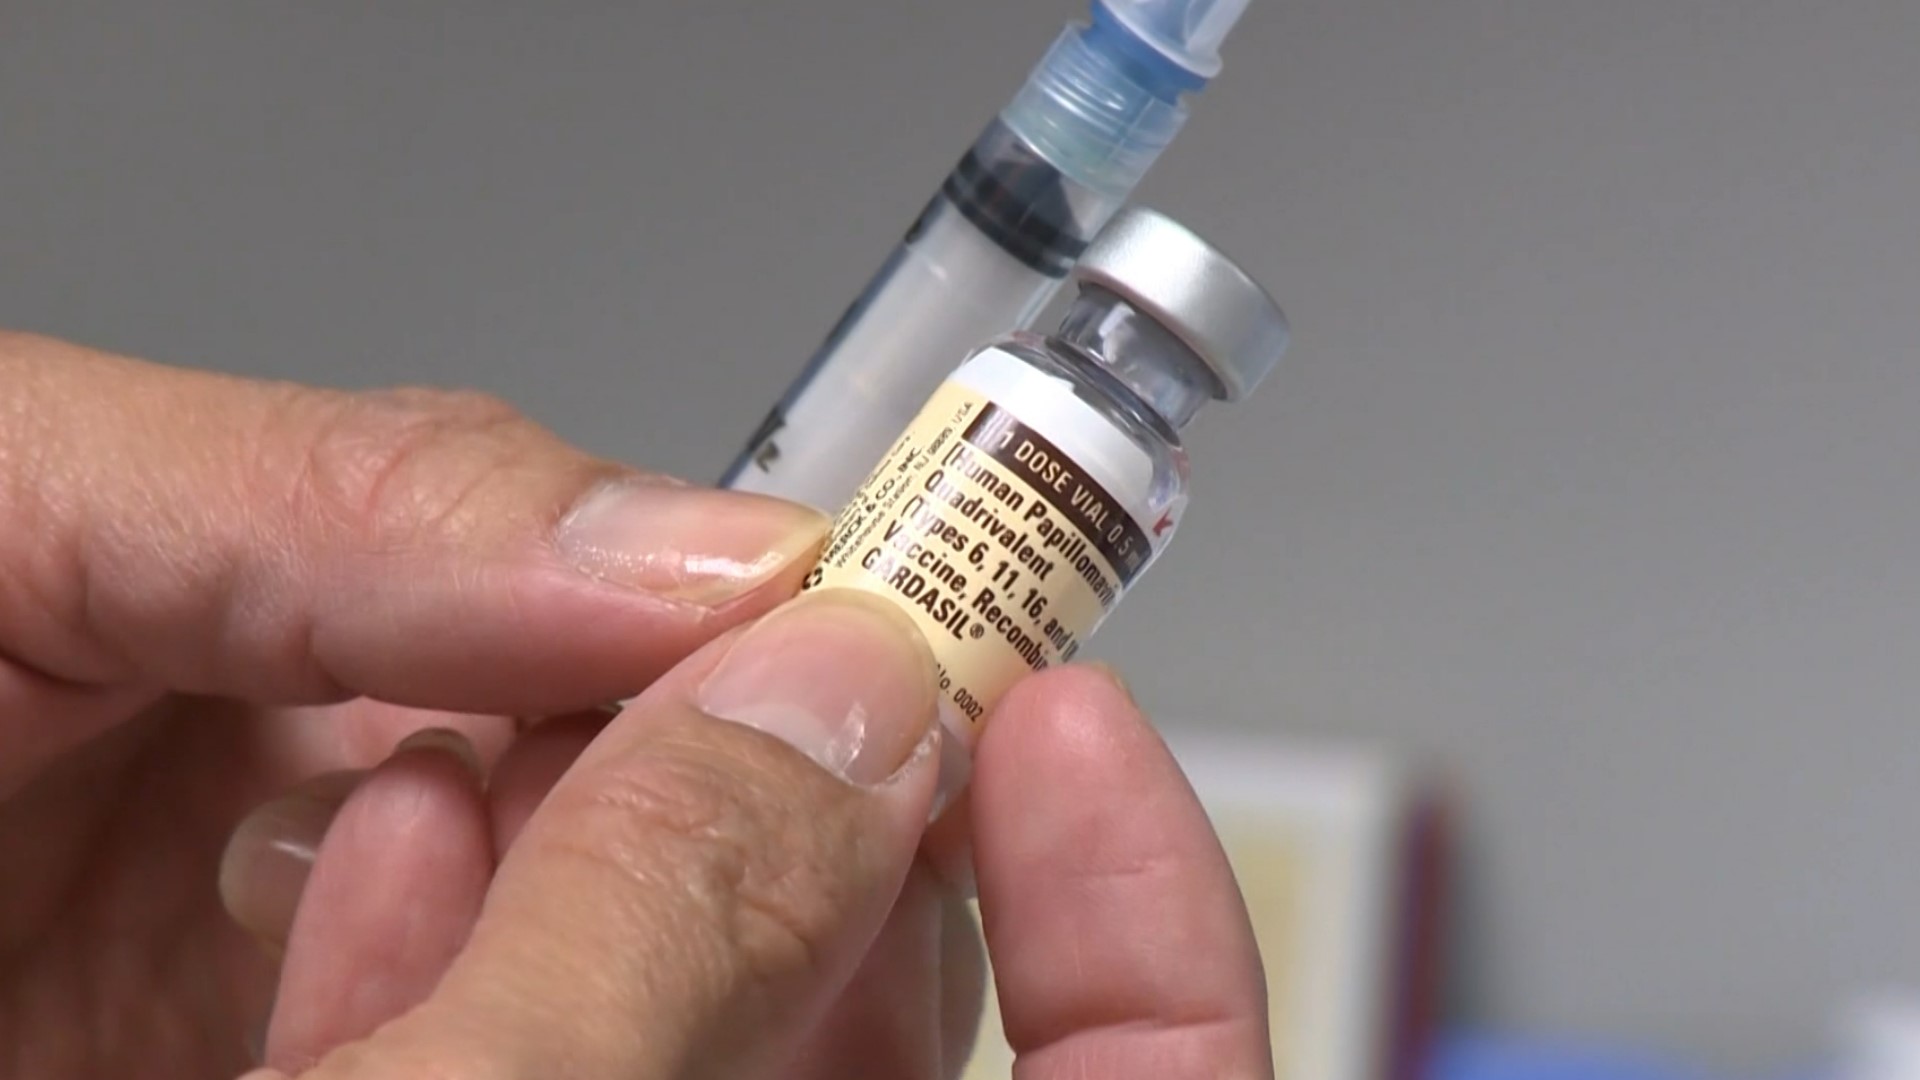 There's been a significant decrease in HPV-related diseases among women who've received the HPV vaccine, experts say.